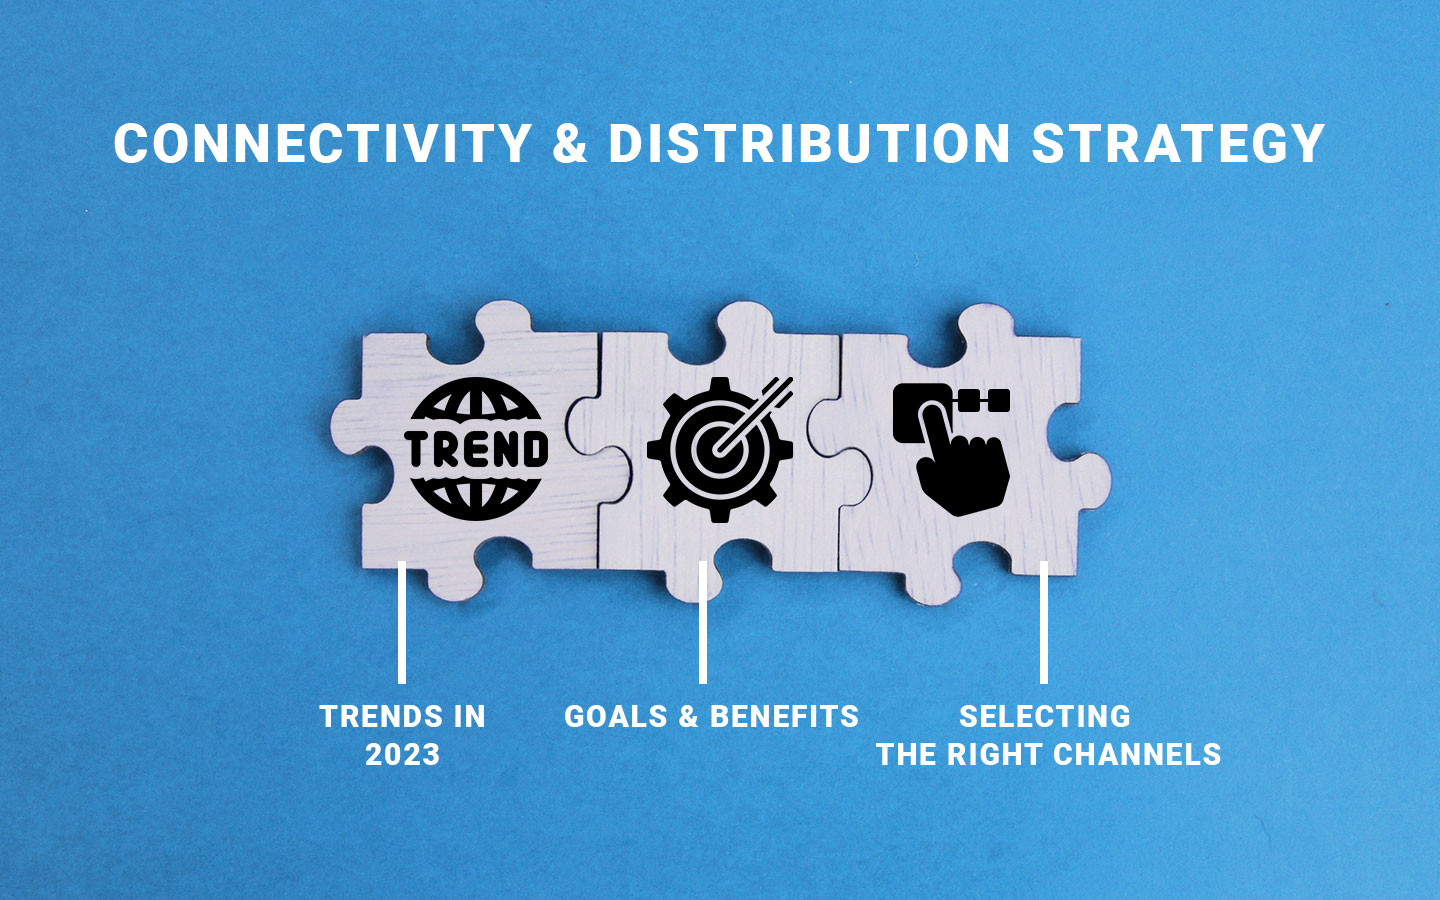 Connectivity & Distribution Strategy – Trends Impacting Your Hotel In 2023